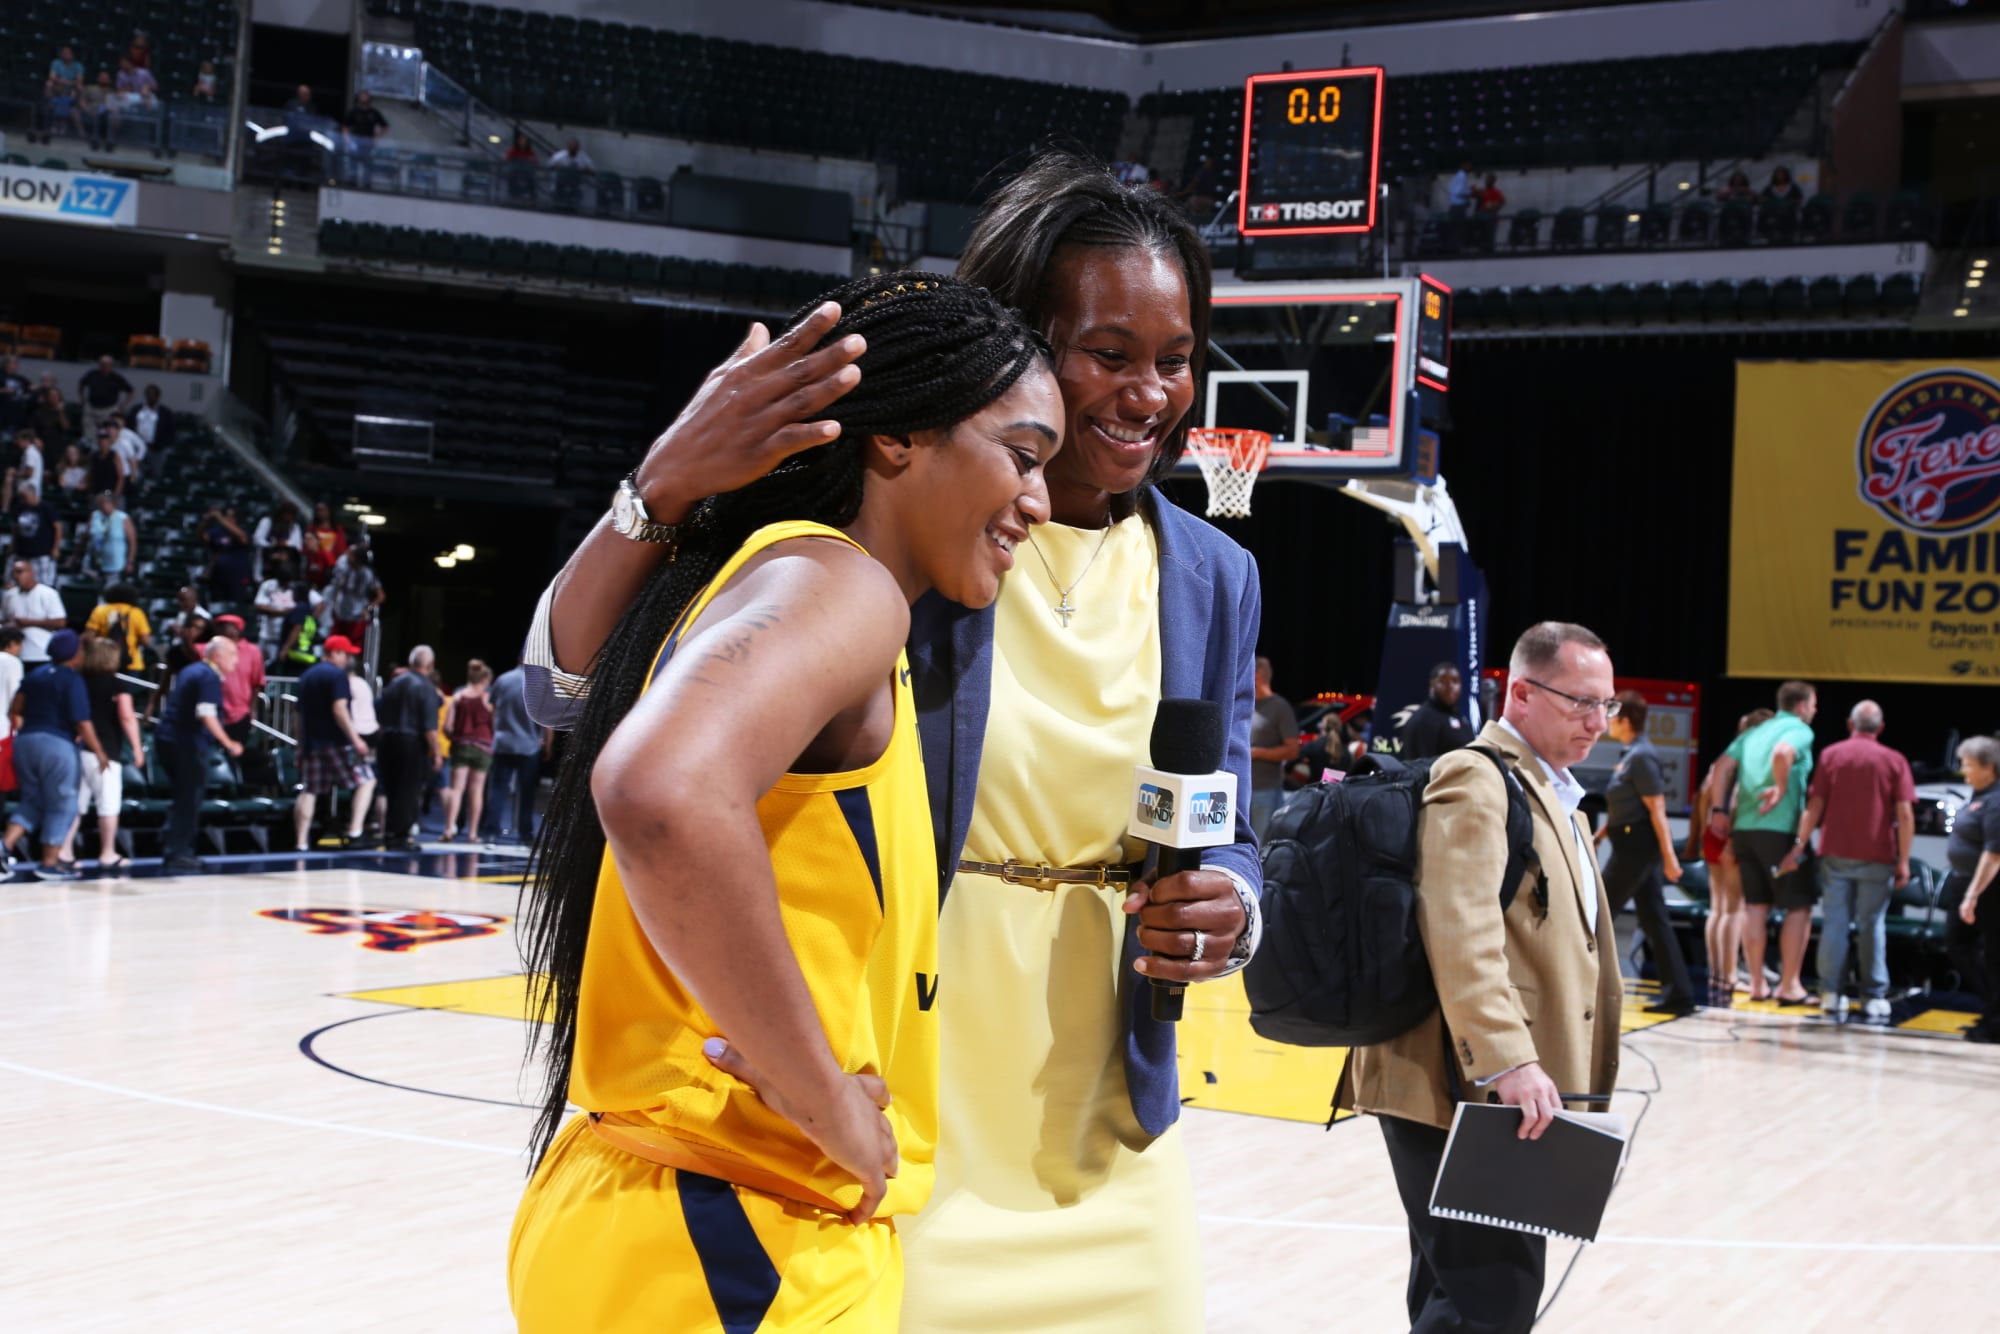 Indiana Fever The joyful breakthrough behind the scenes after Indiana